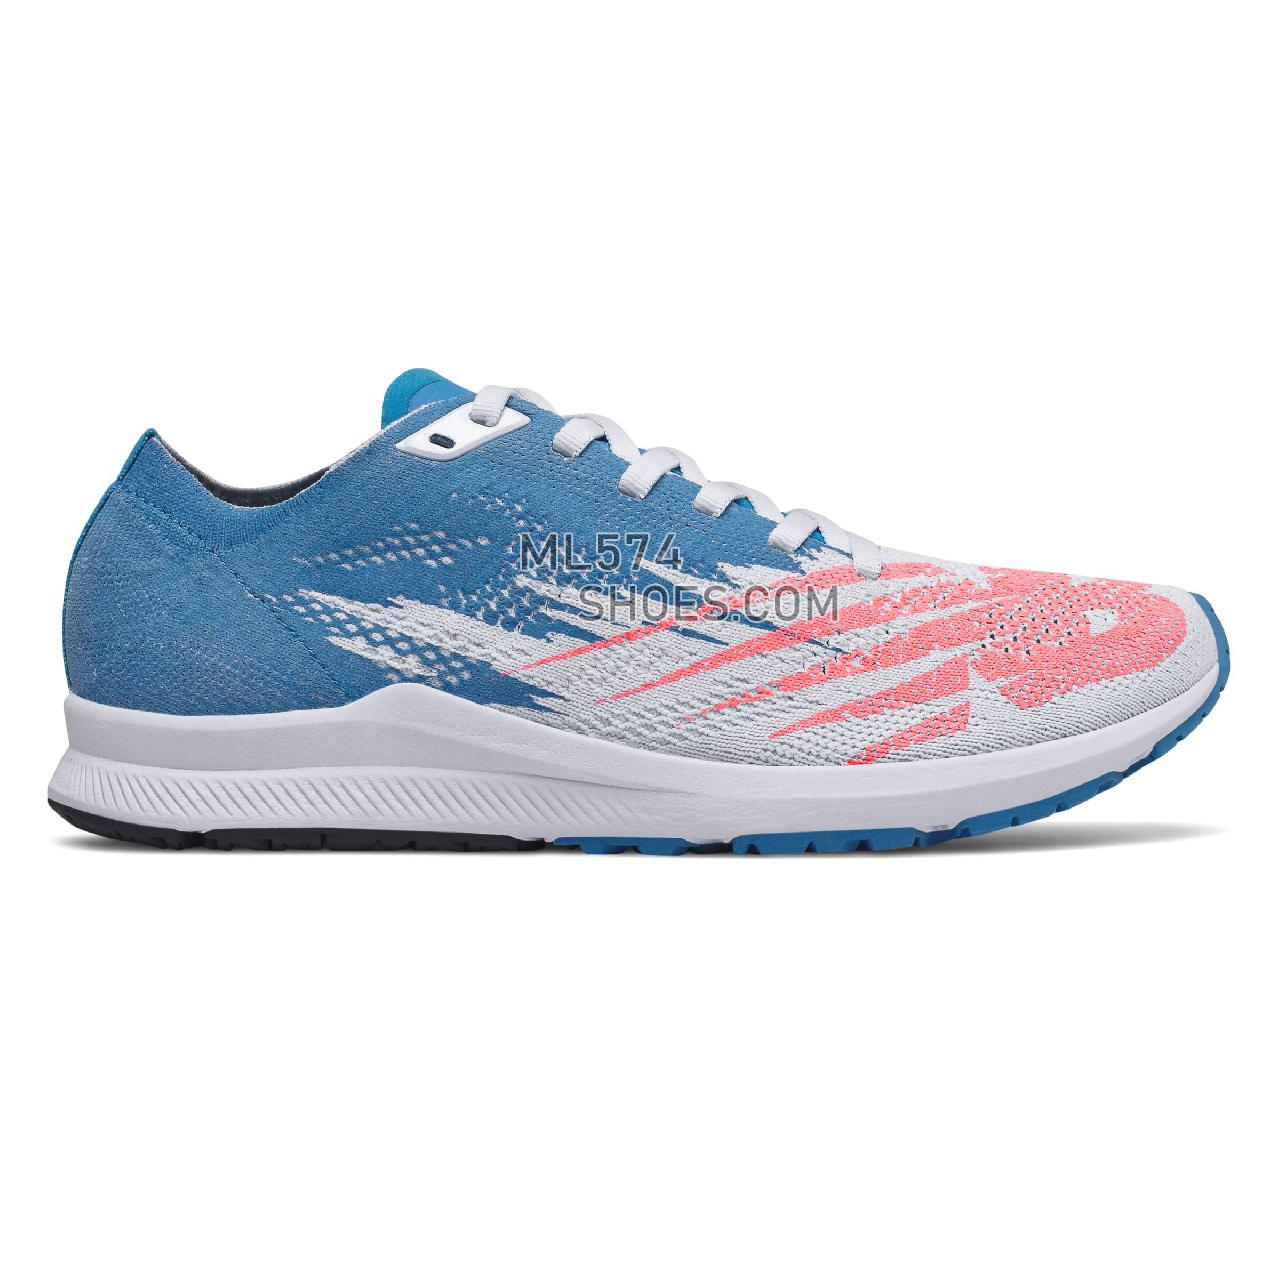 New Balance 1500v6 - Women's Neutral Running - Moon Dust with Vision Blue and Pink - W1500WB6